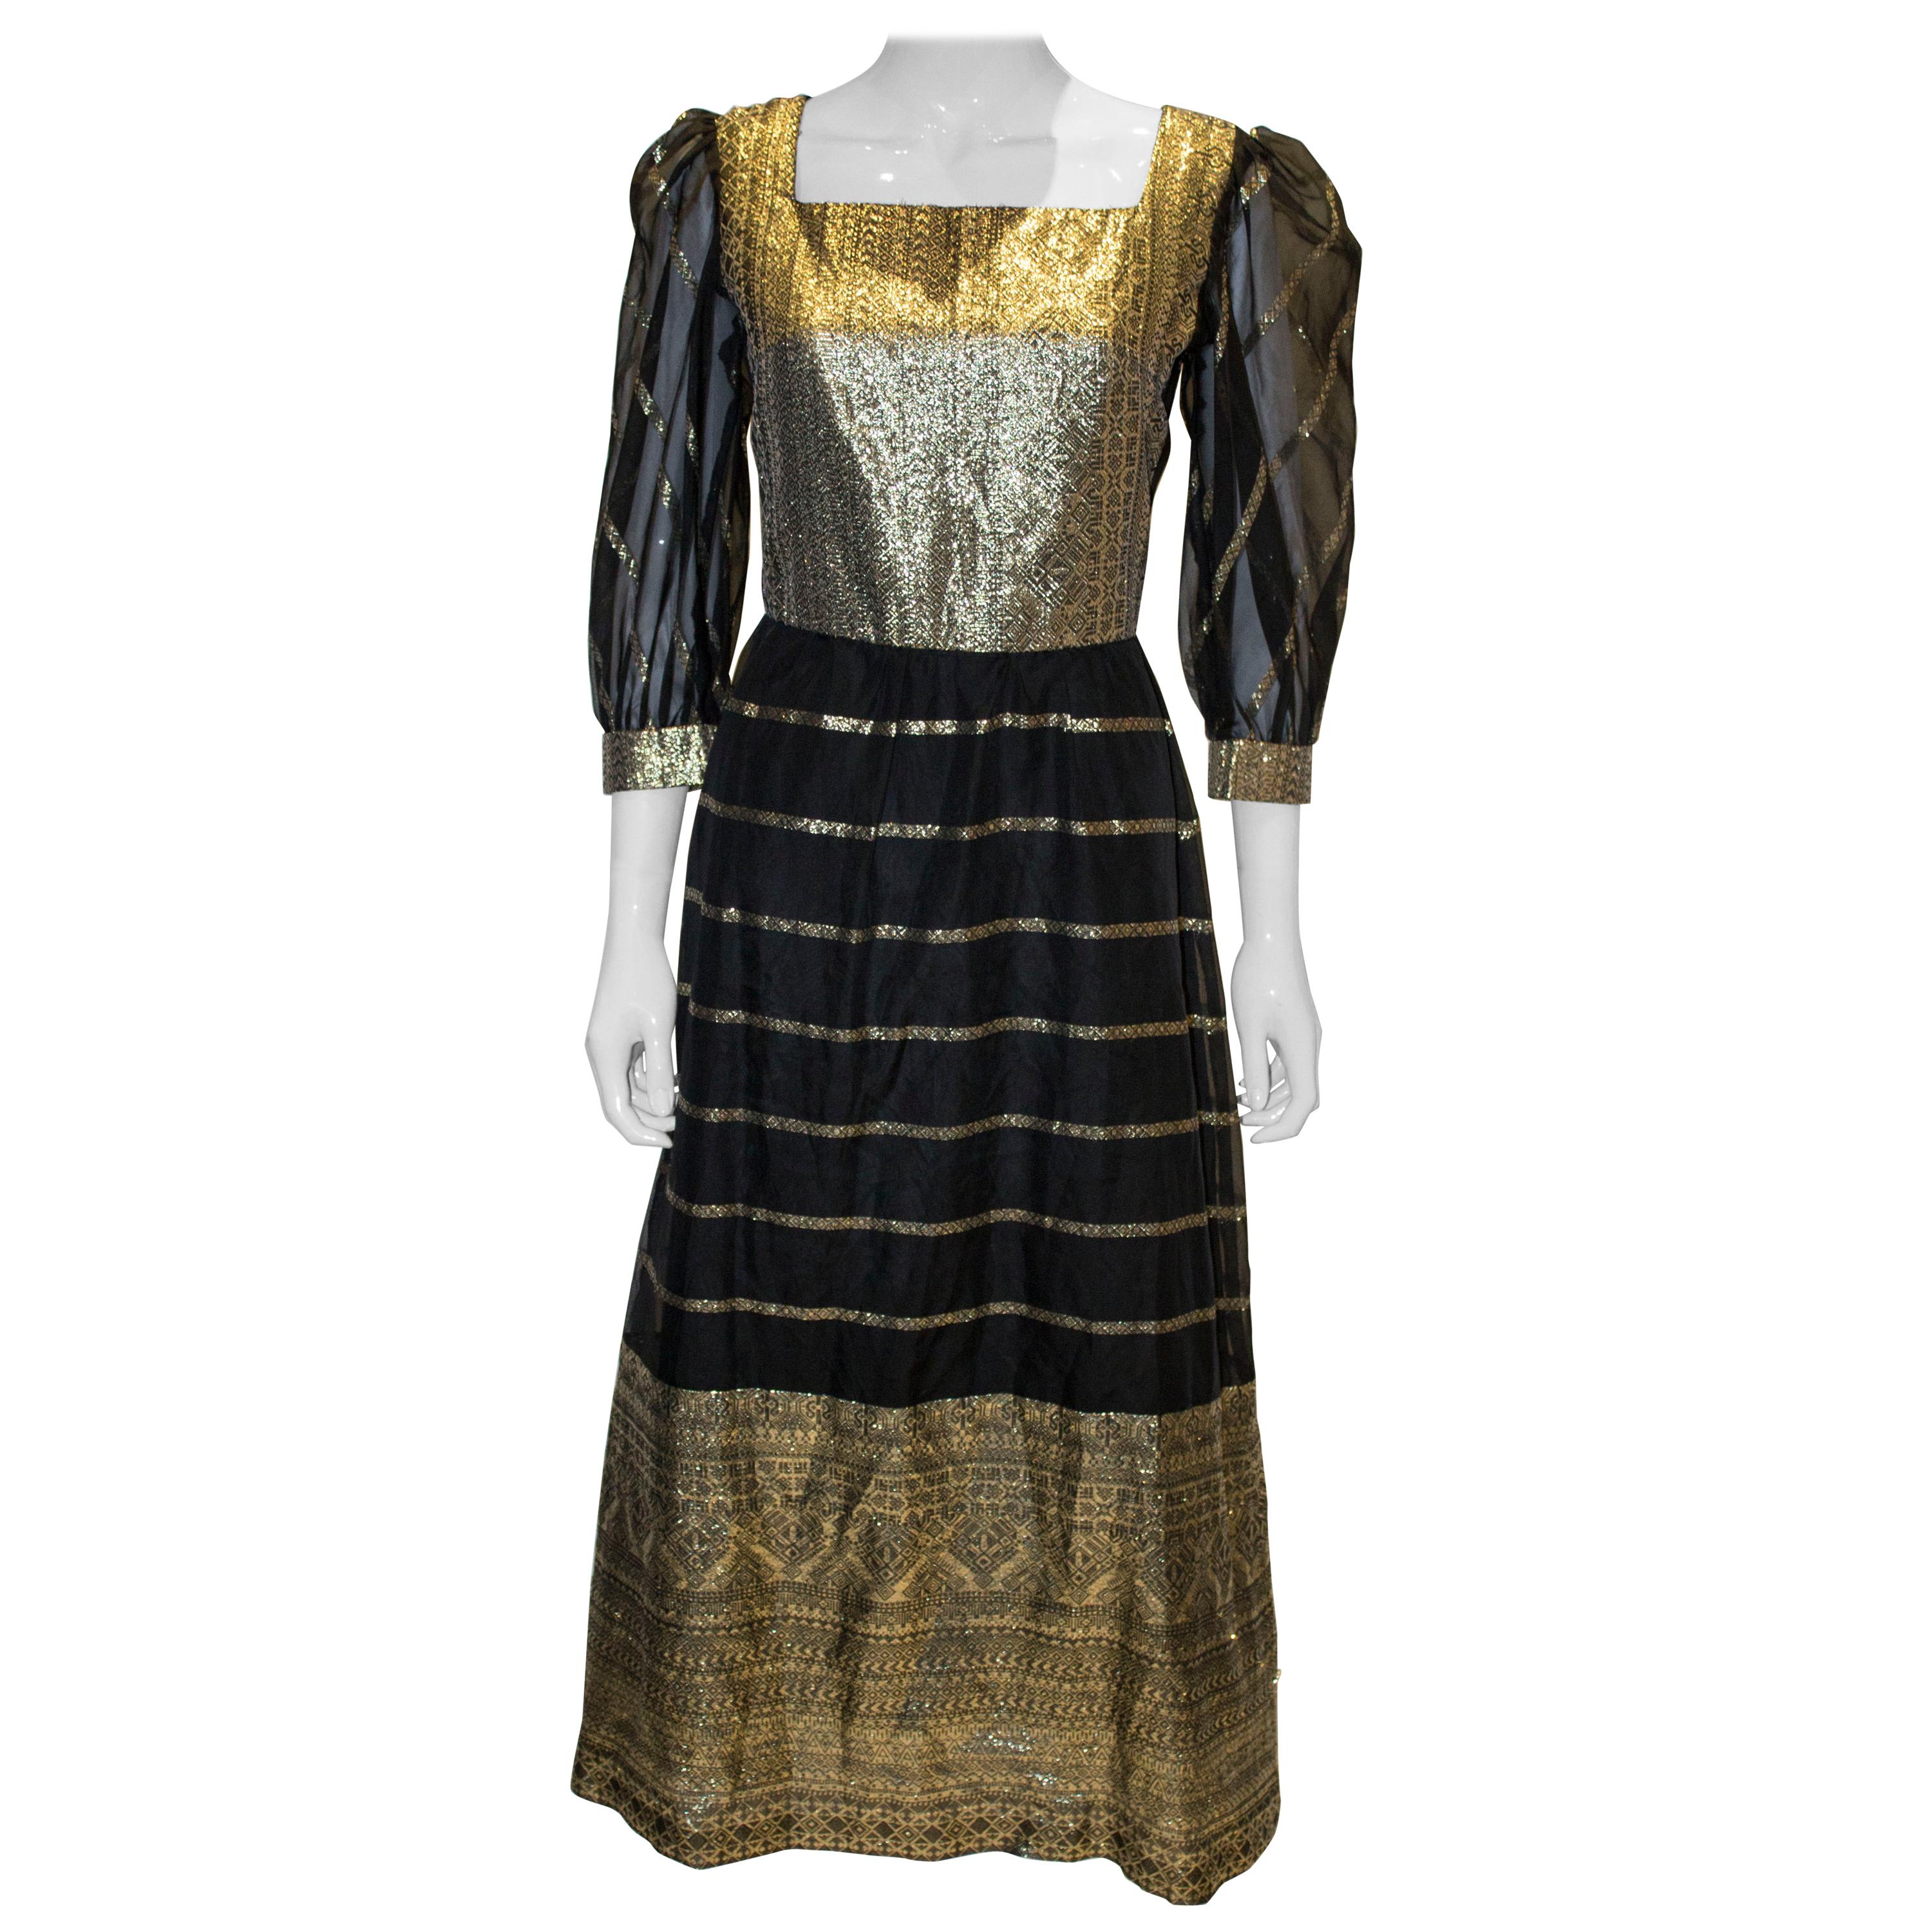 Vintage 1970s Black and Gold Party Dress For Sale